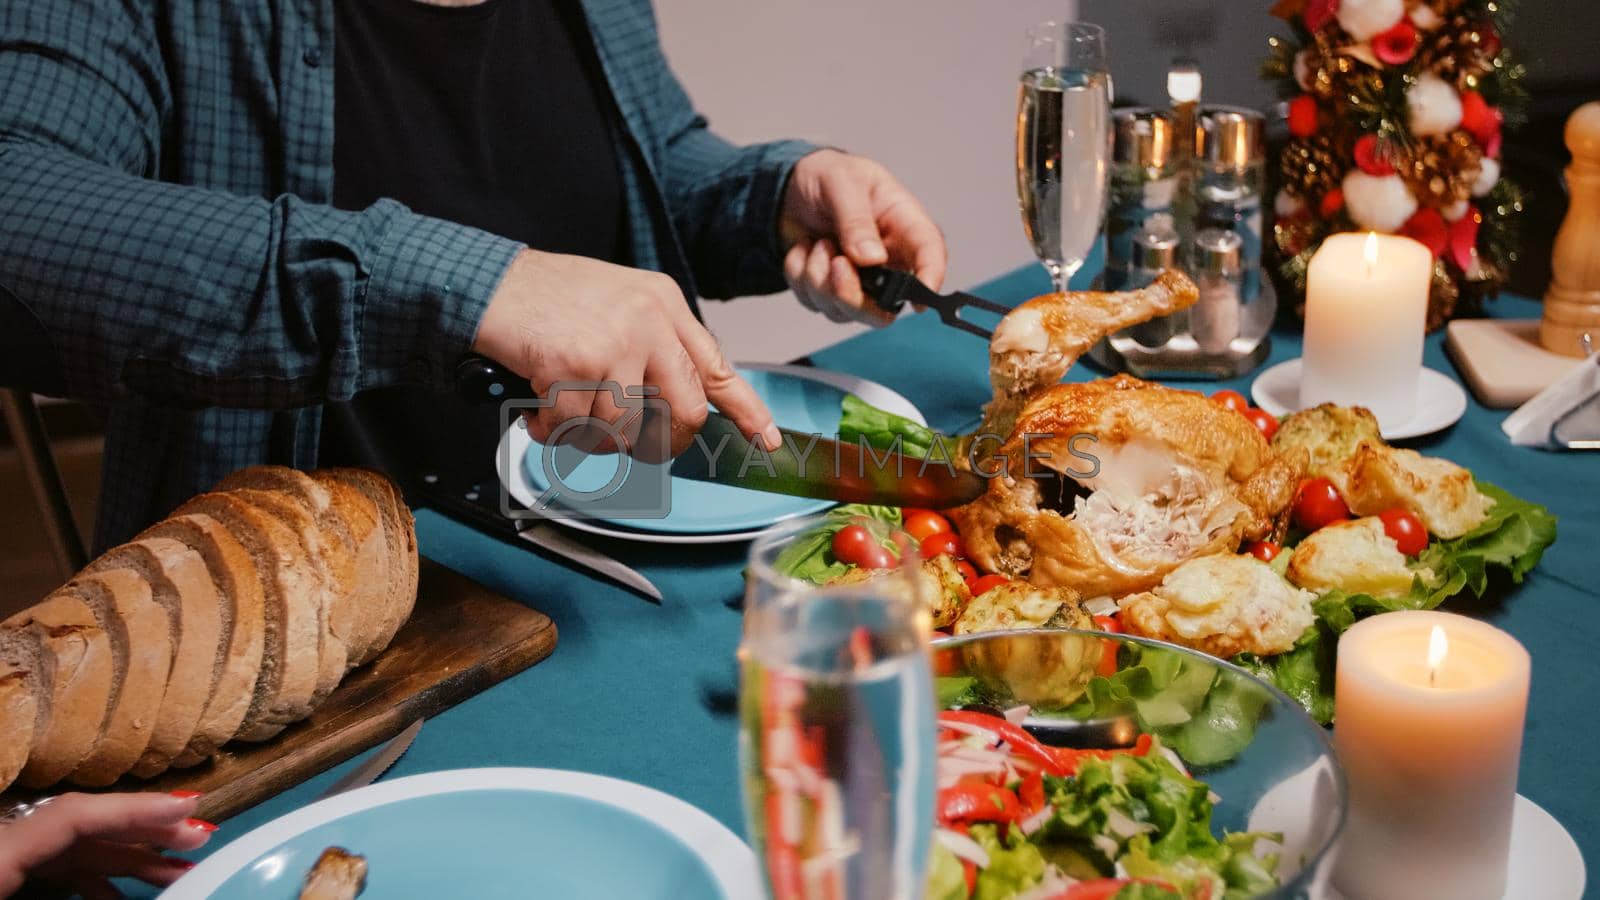 Close up of man cutting meal at christmas dinner celebration. Adult preparing chicken for woman, enjoying festive food and drinking champagne. Holiday festivity with food and alcohol